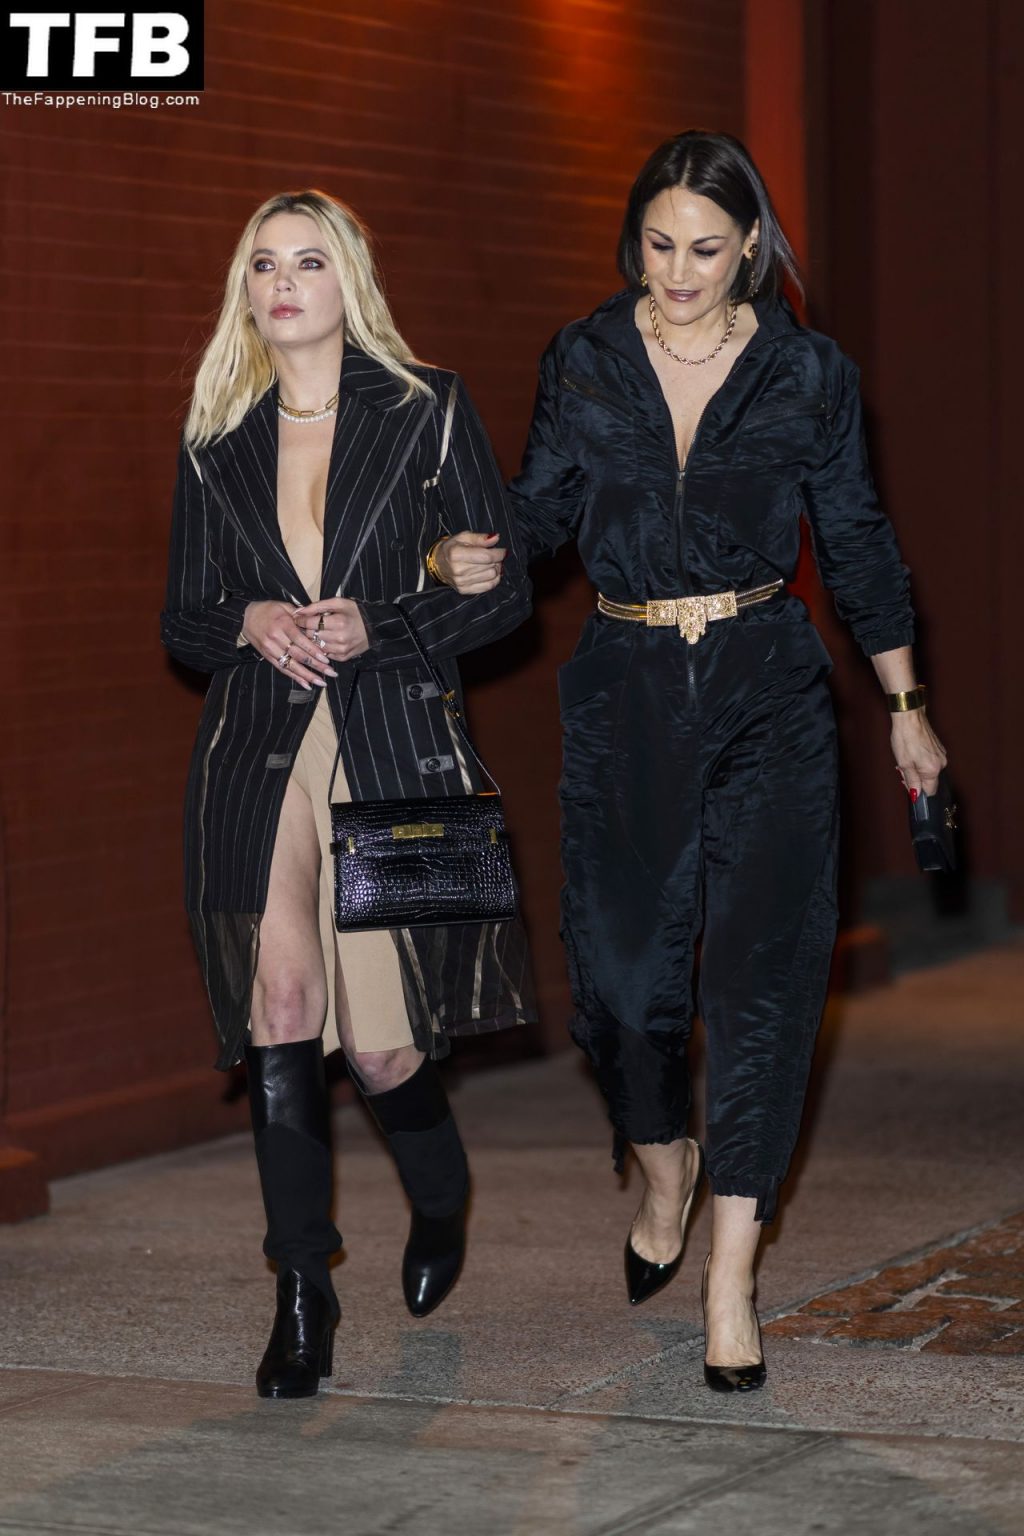 Ashley Benson Sexy The Fappening Blog 3 1024x1536 - Ashley Benson and a Girlfriend Look Fashionable as They Head to Dinner in NYC (5 Photos)